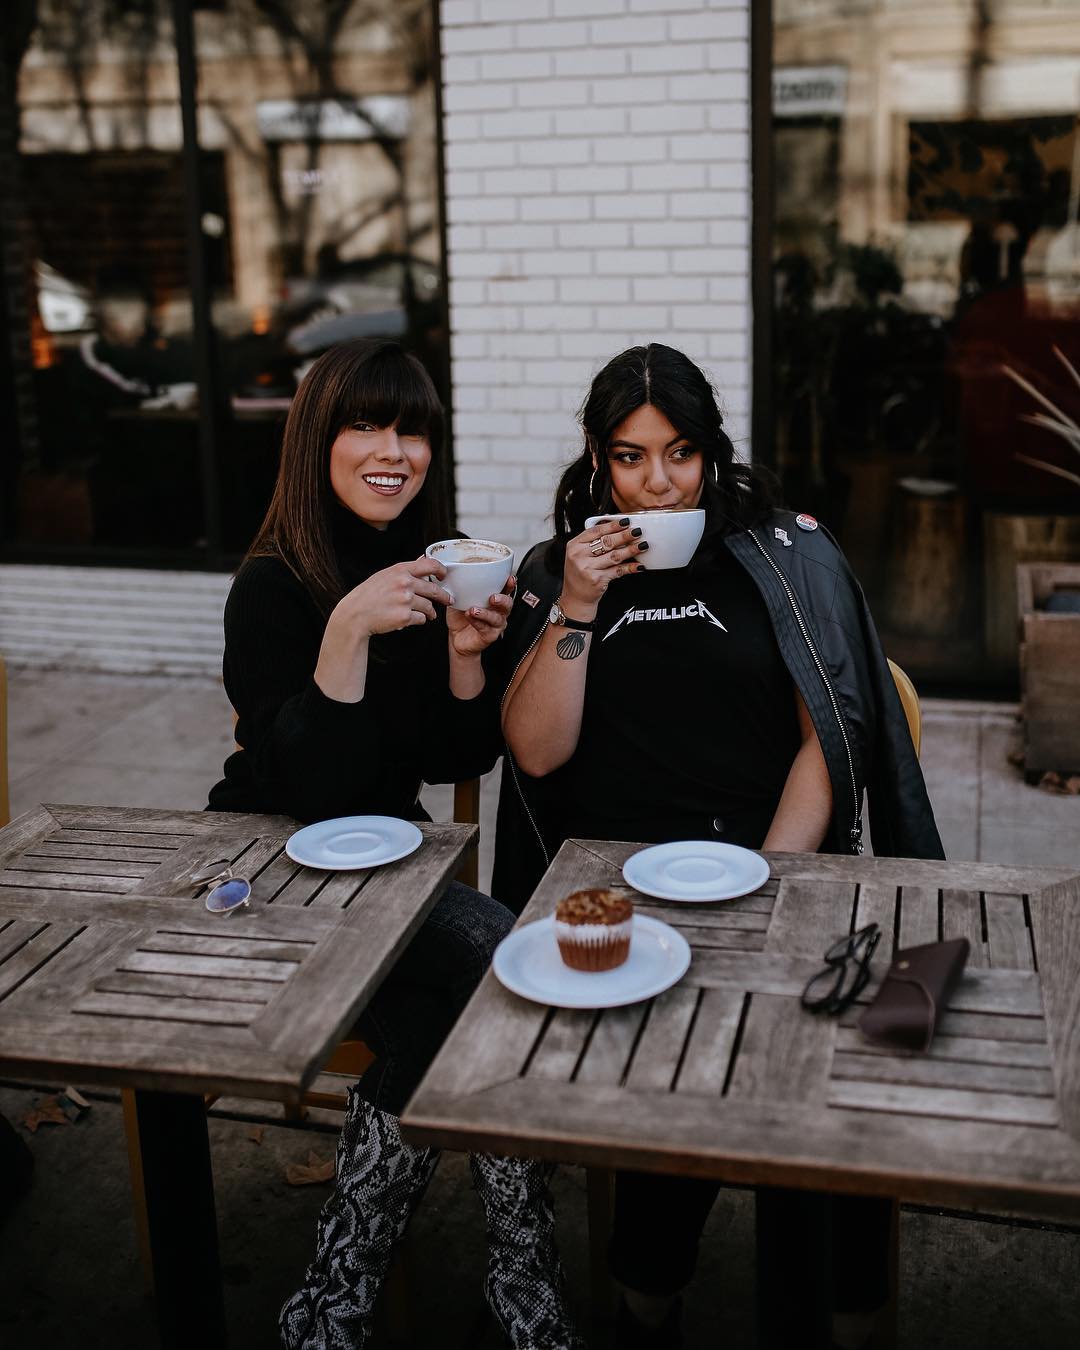 Women Drinking Coffee Together Outside a Coffee Shop. Photo by Instagram user @myfashionseries